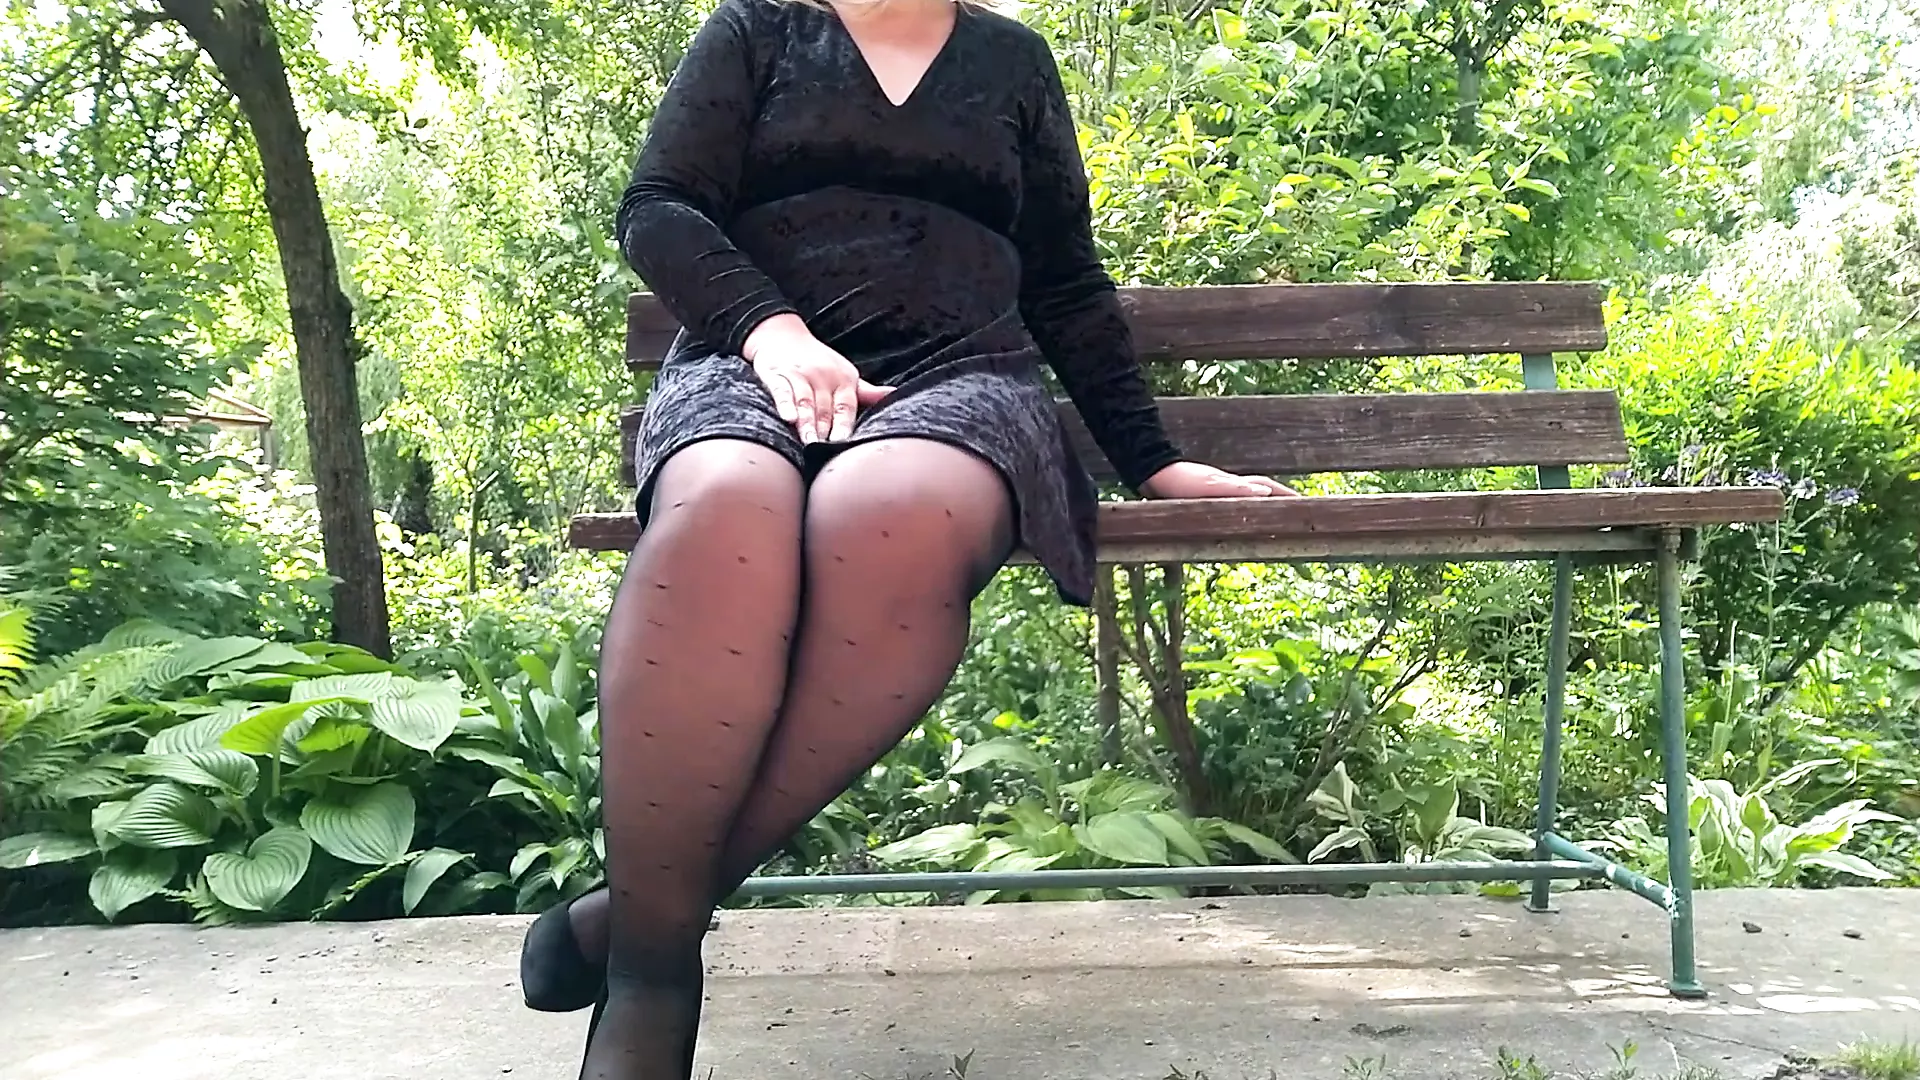 Naughty milf in pantyhose pissing in the park on a bench pic pic